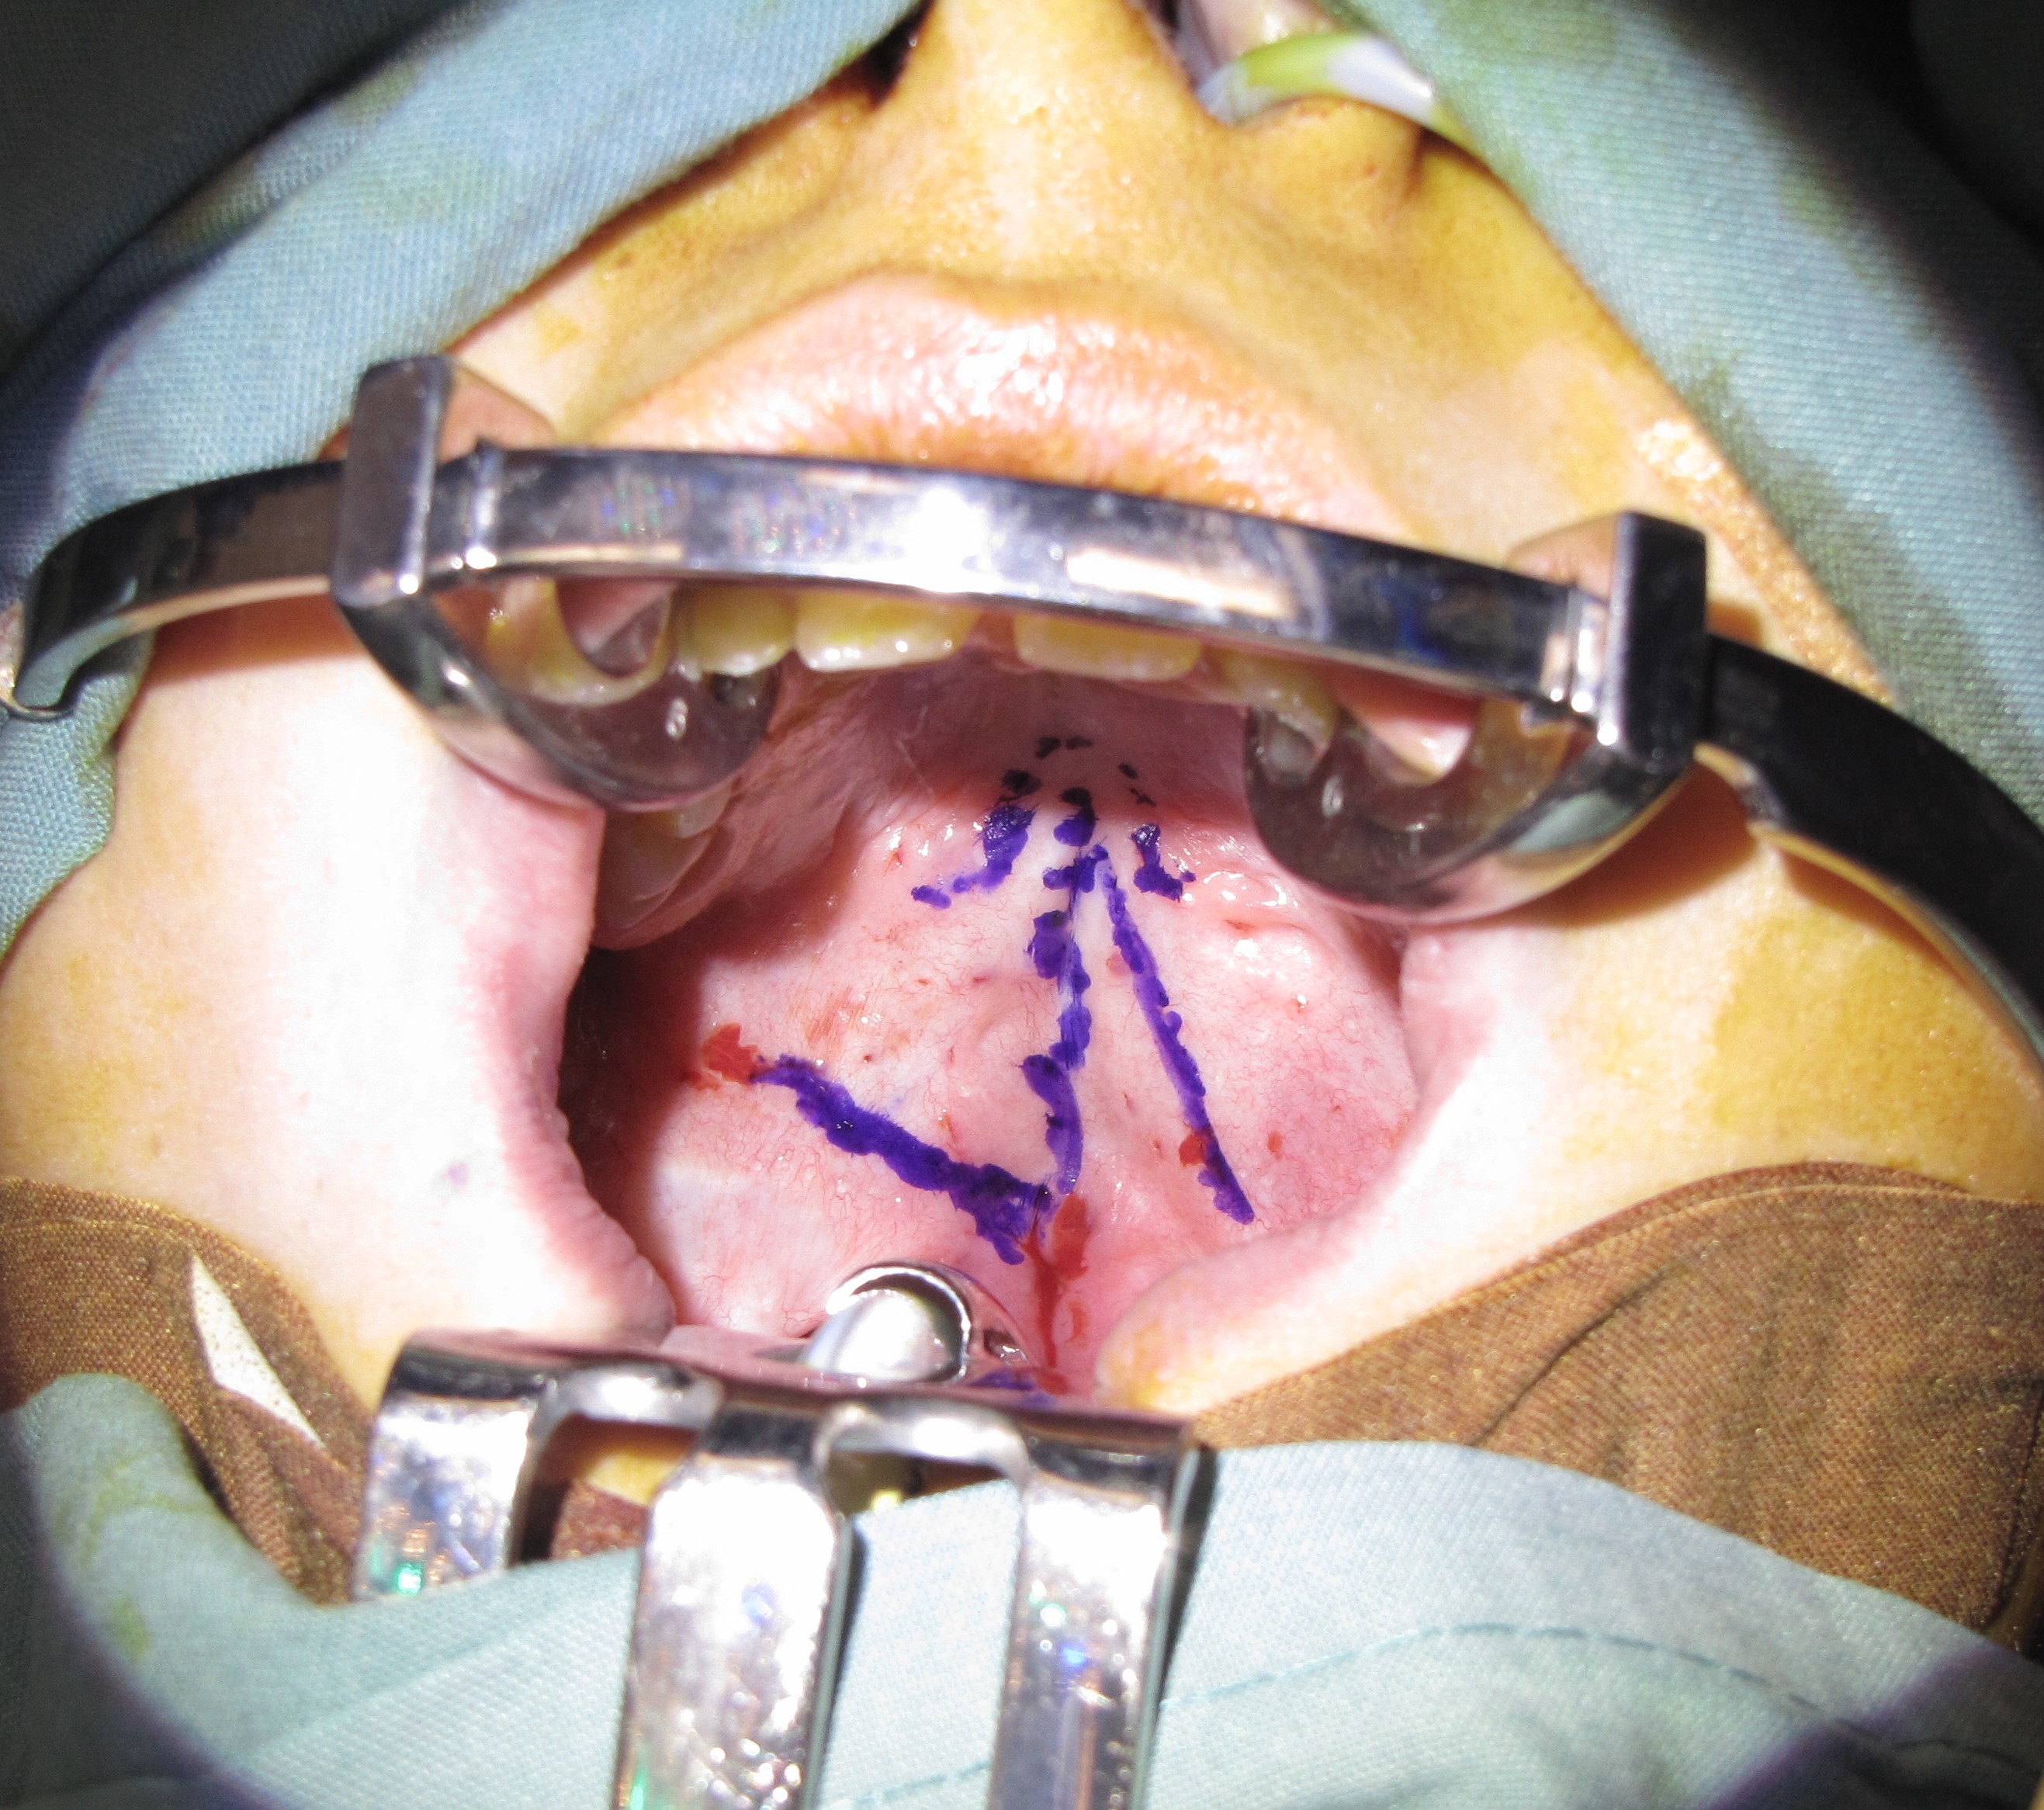 Operative view of a secondary cleft palate involving the soft palate exclusively